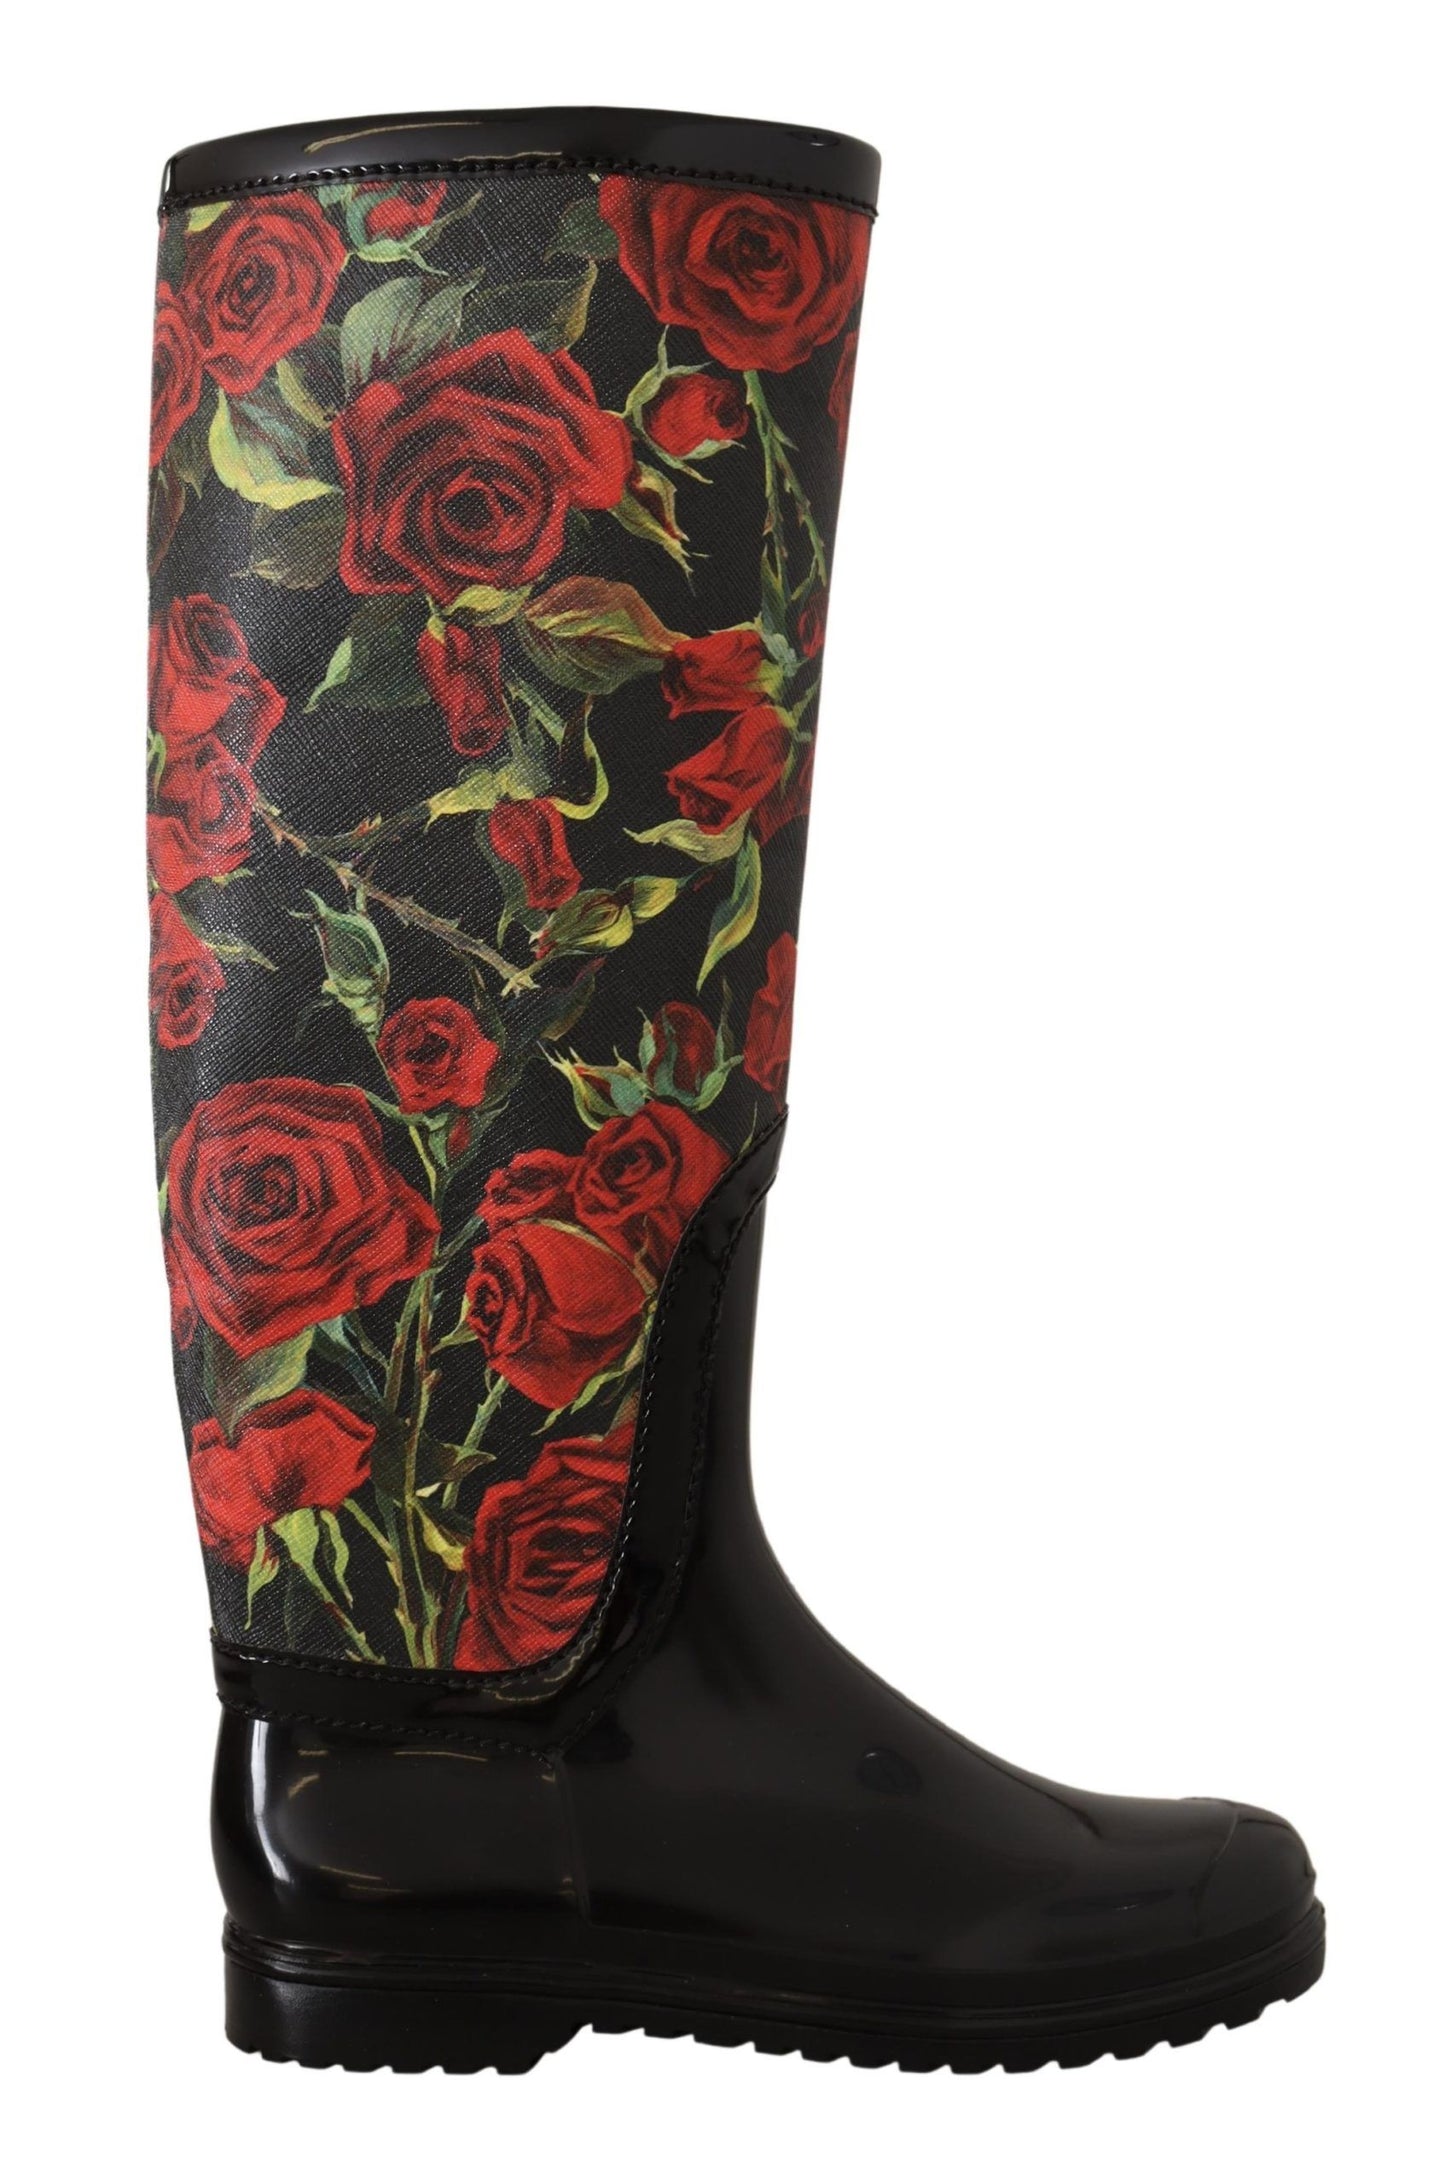 Black Rubber Red Roses Rain Knee High Boots